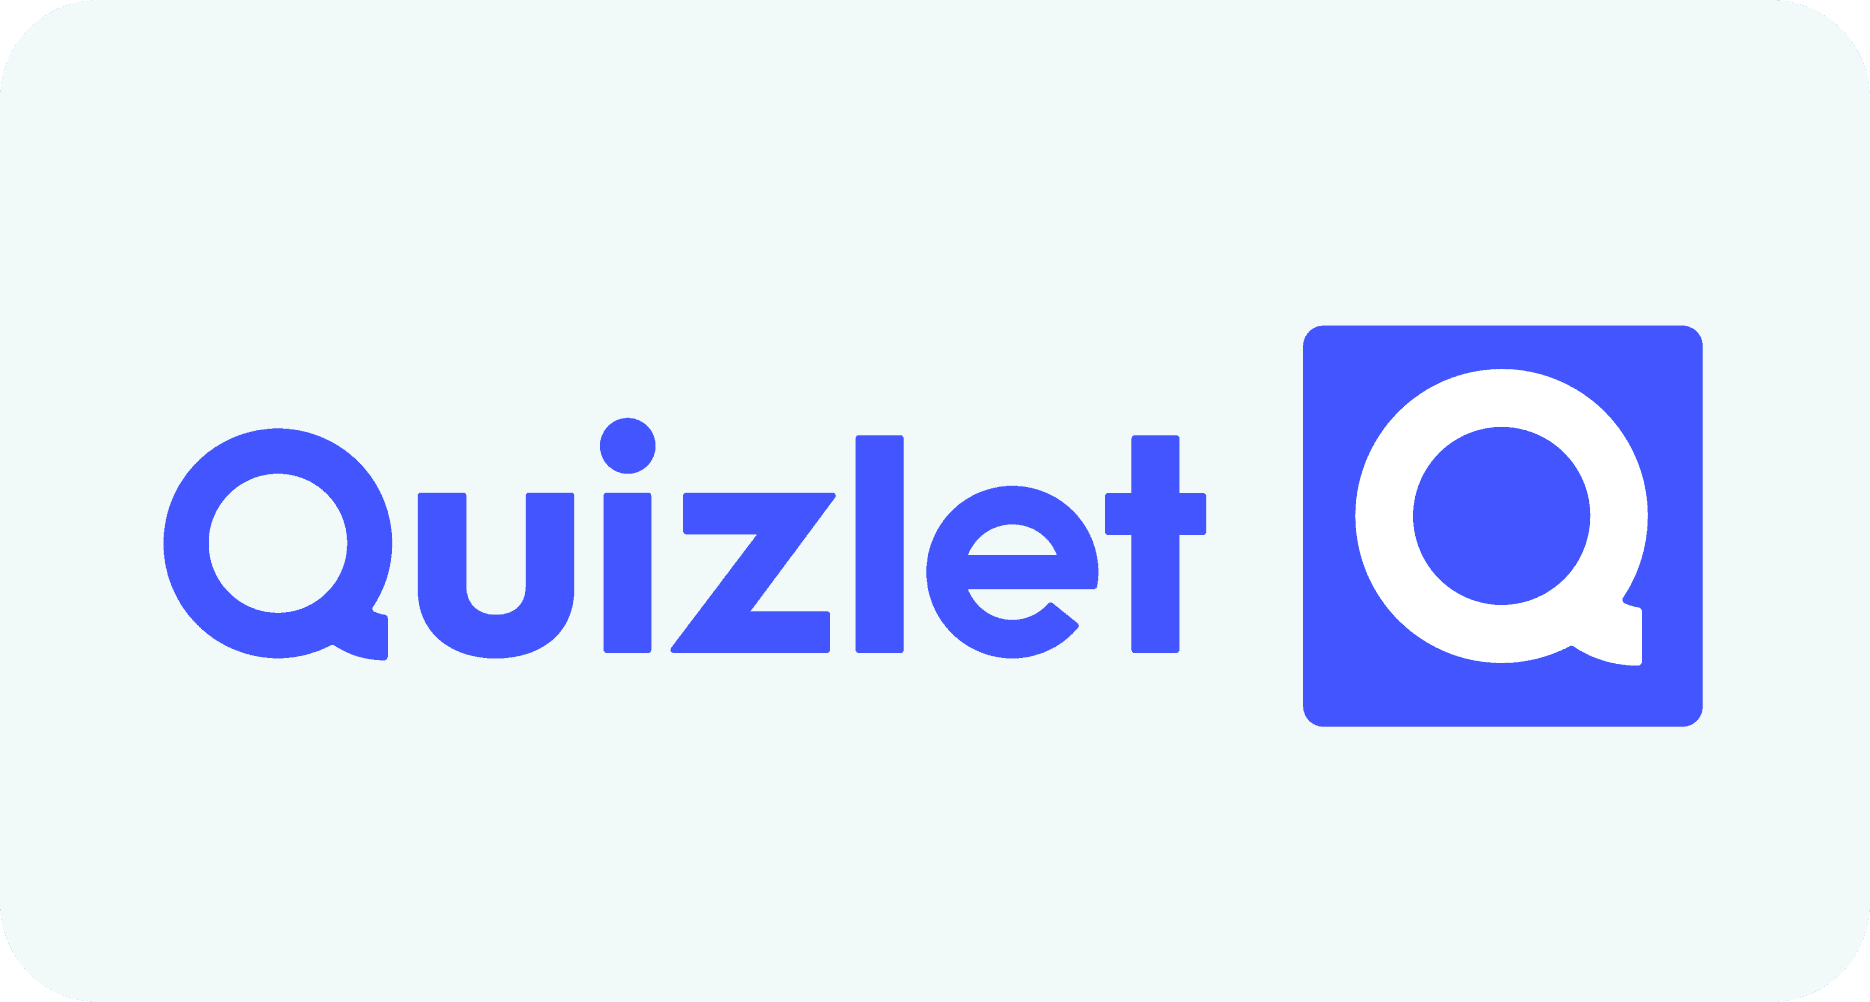 Quizlet Logo as an App that features Spaced Repetition